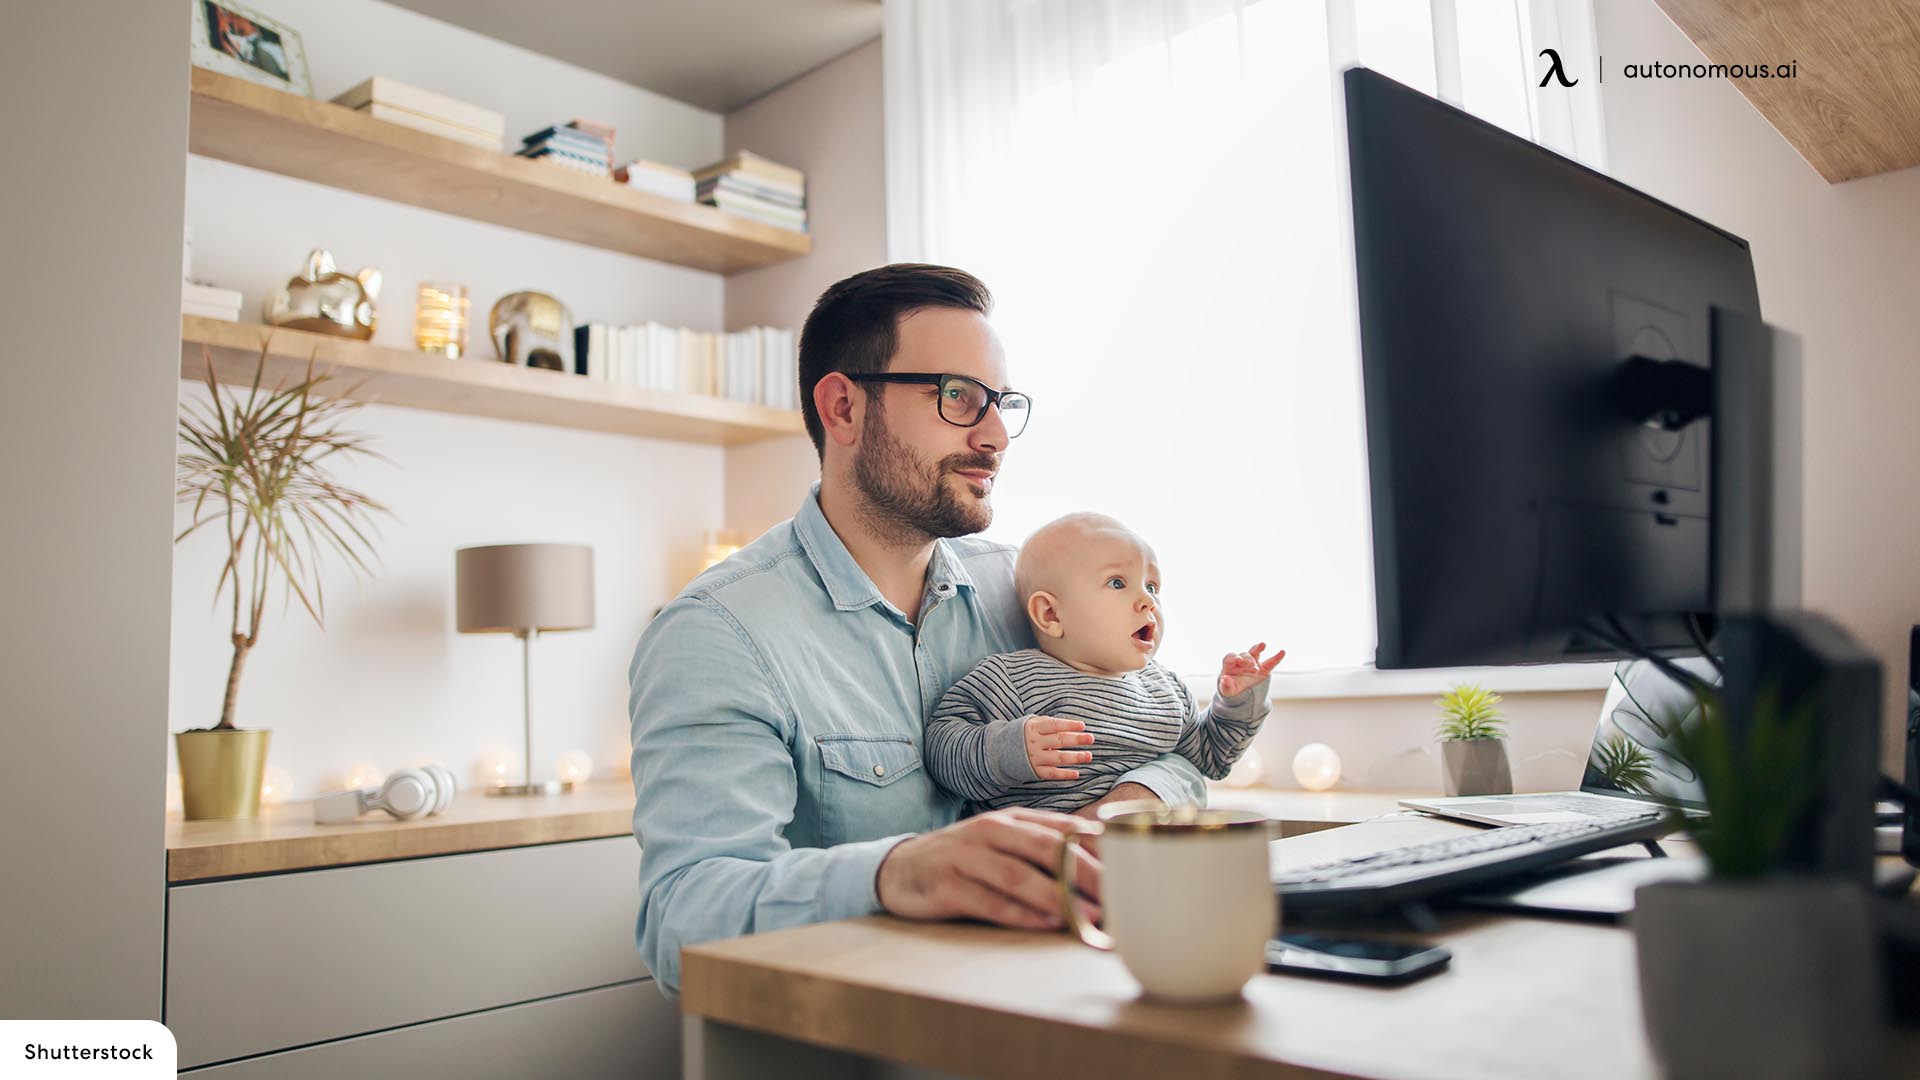 How to Support Parents Working From Home